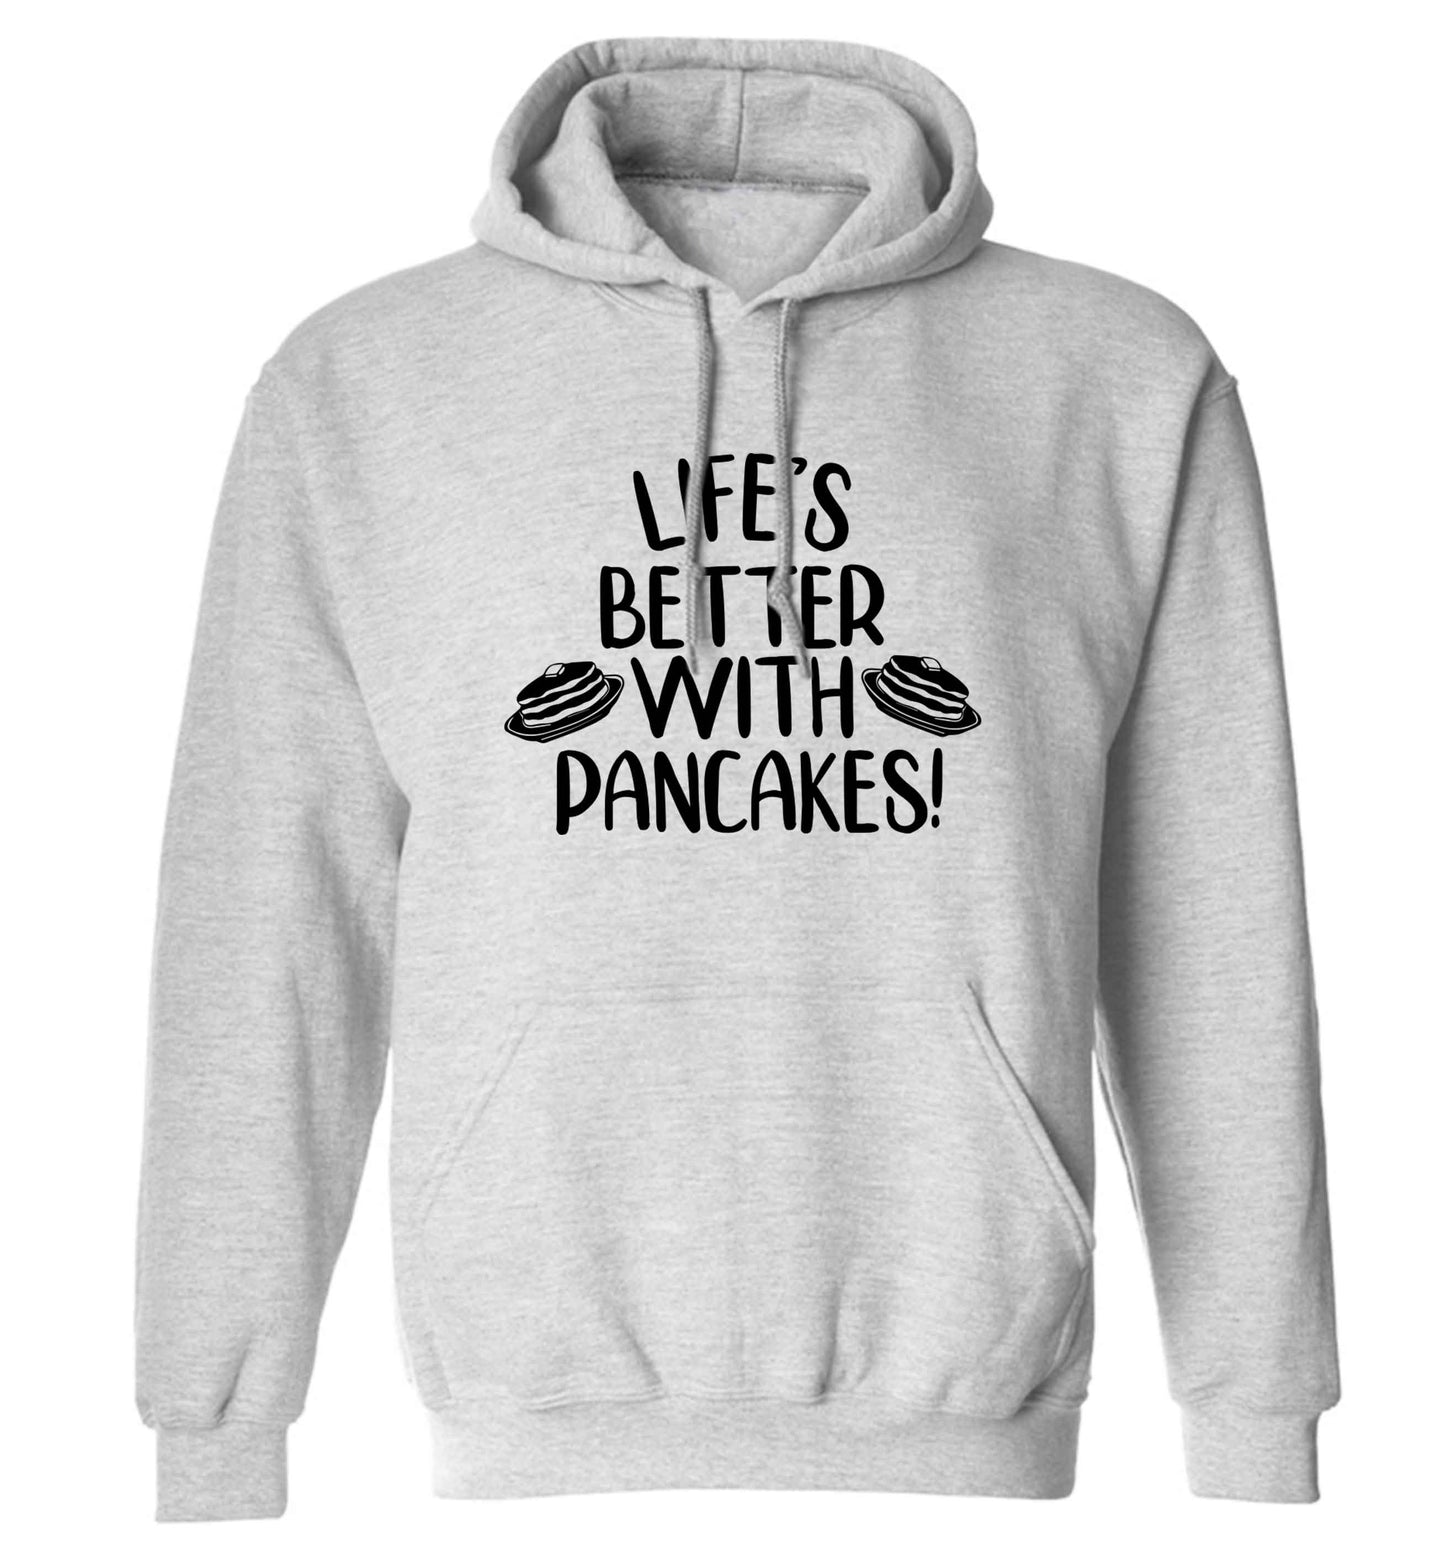 Life's better with pancakes adults unisex grey hoodie 2XL